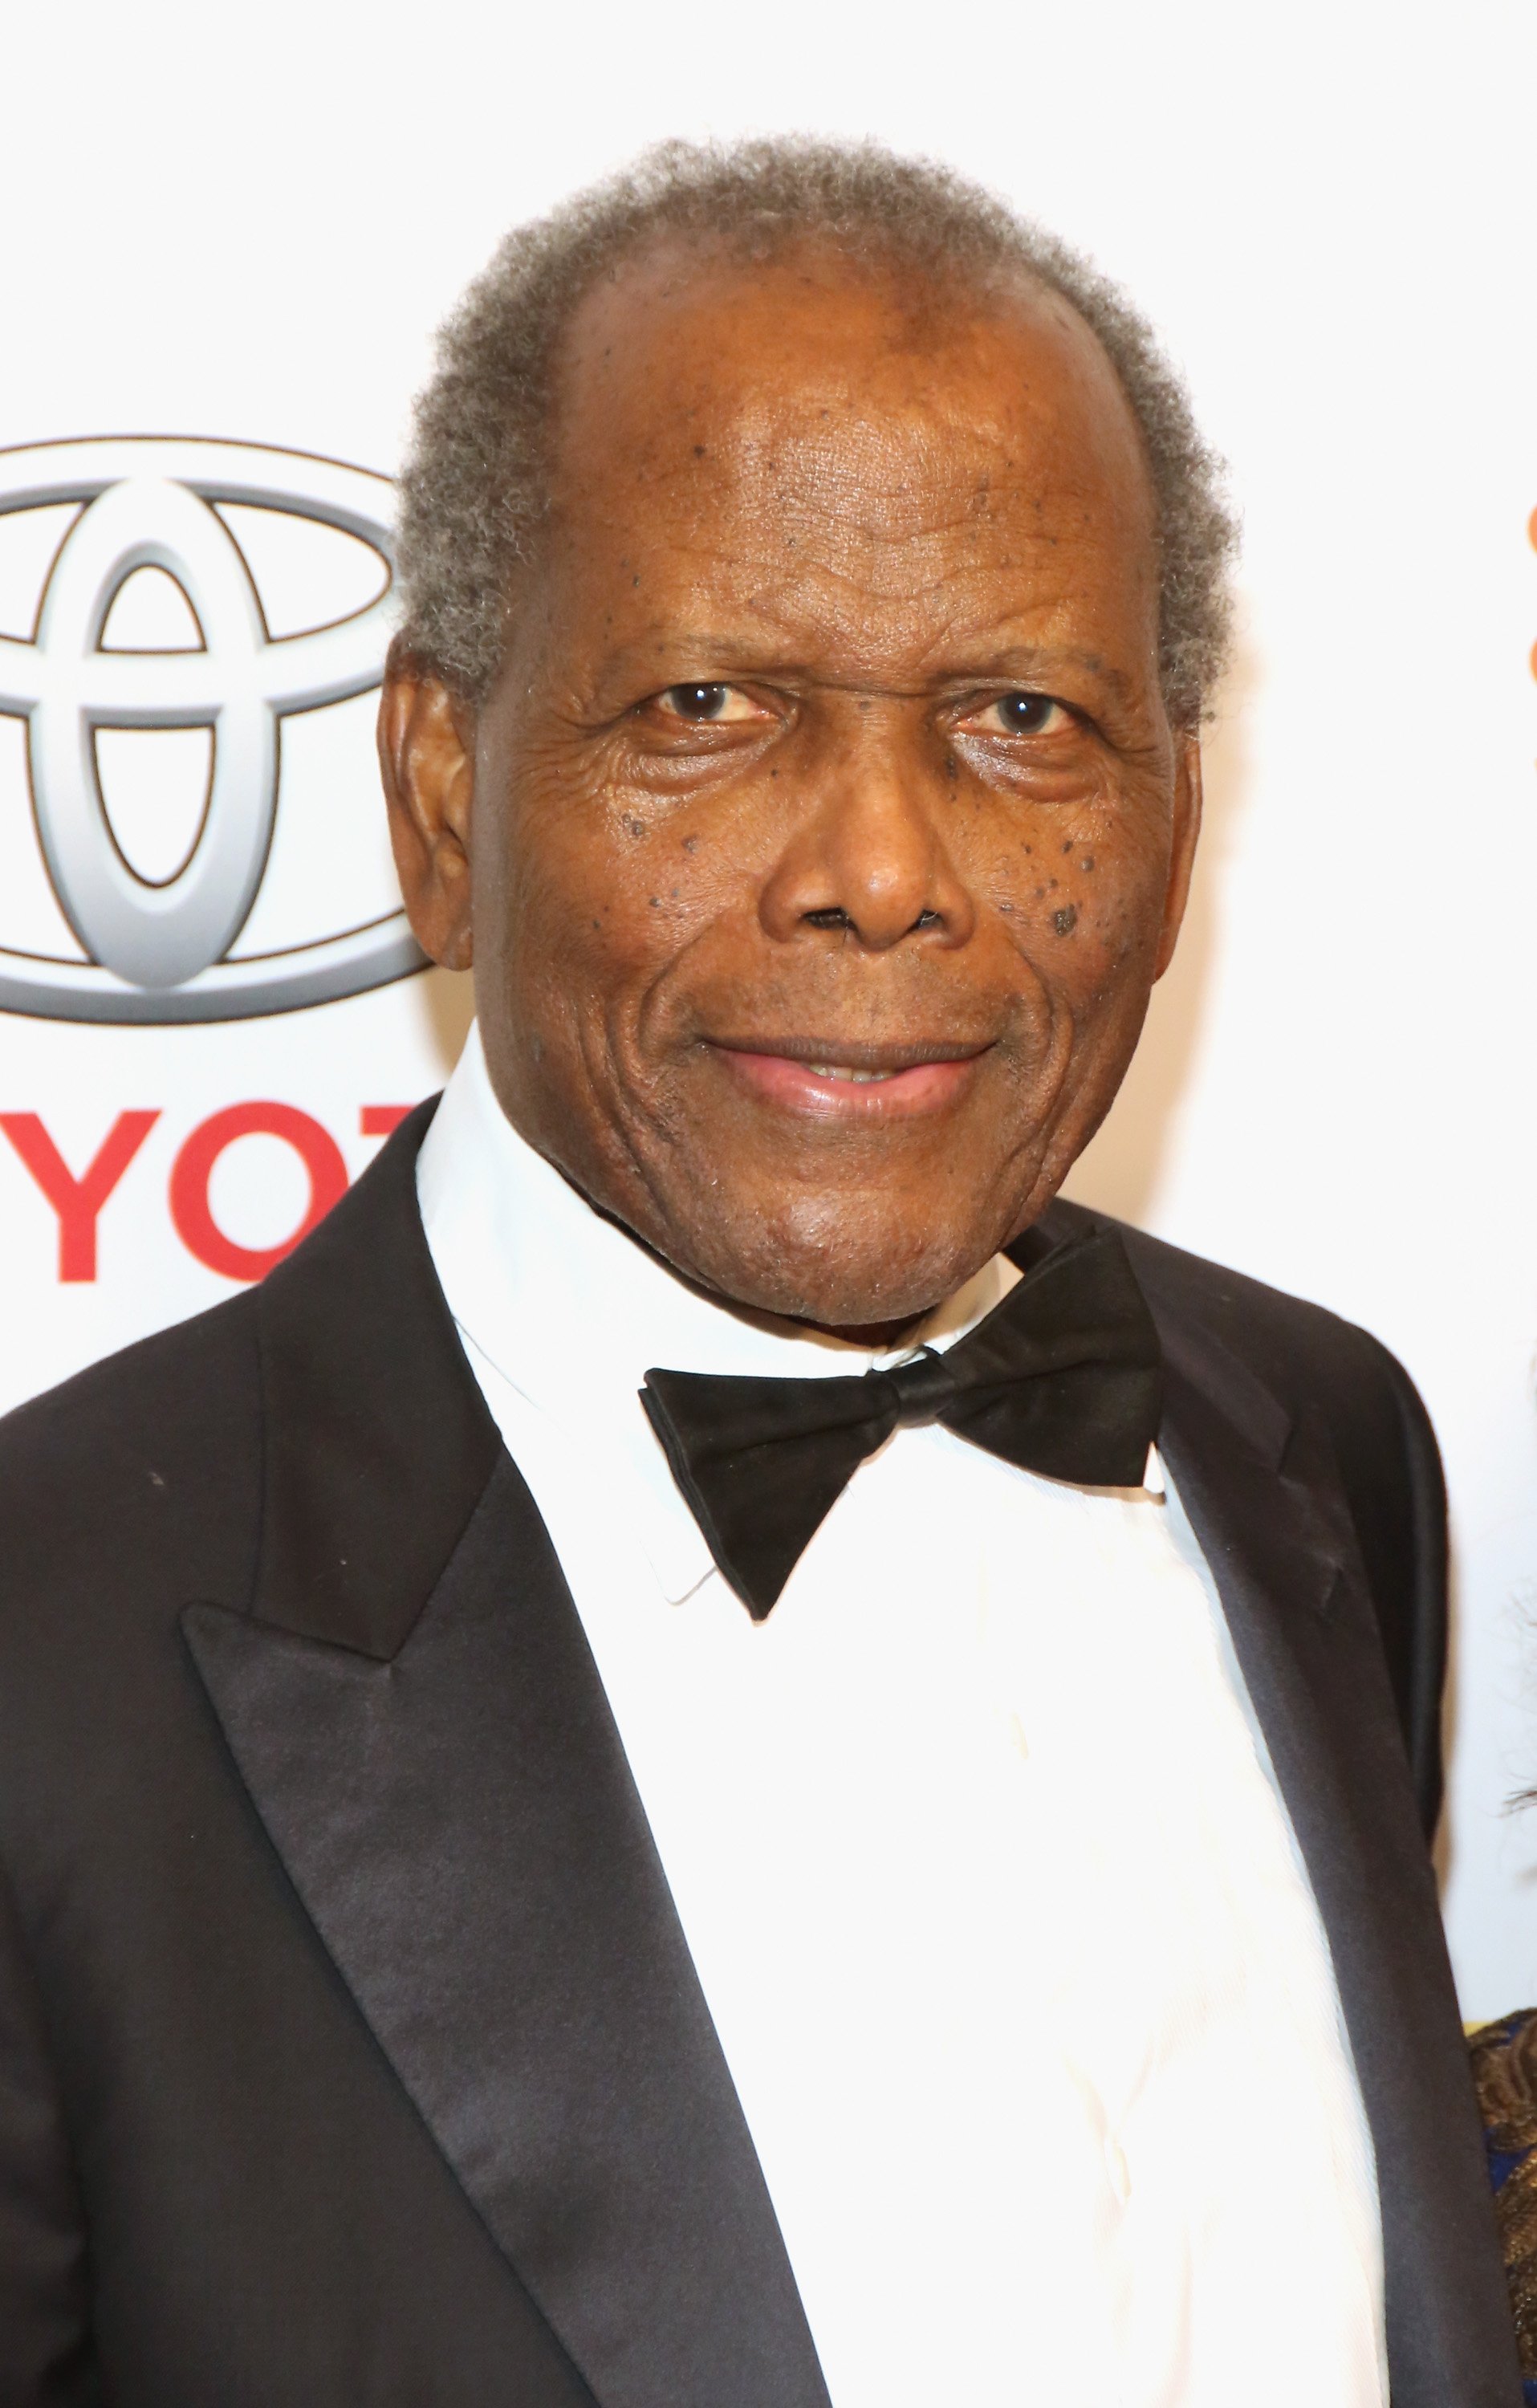 Sidney Poitier on November 14, 2014 in Beverly Hills, California. | Photo: Getty Images